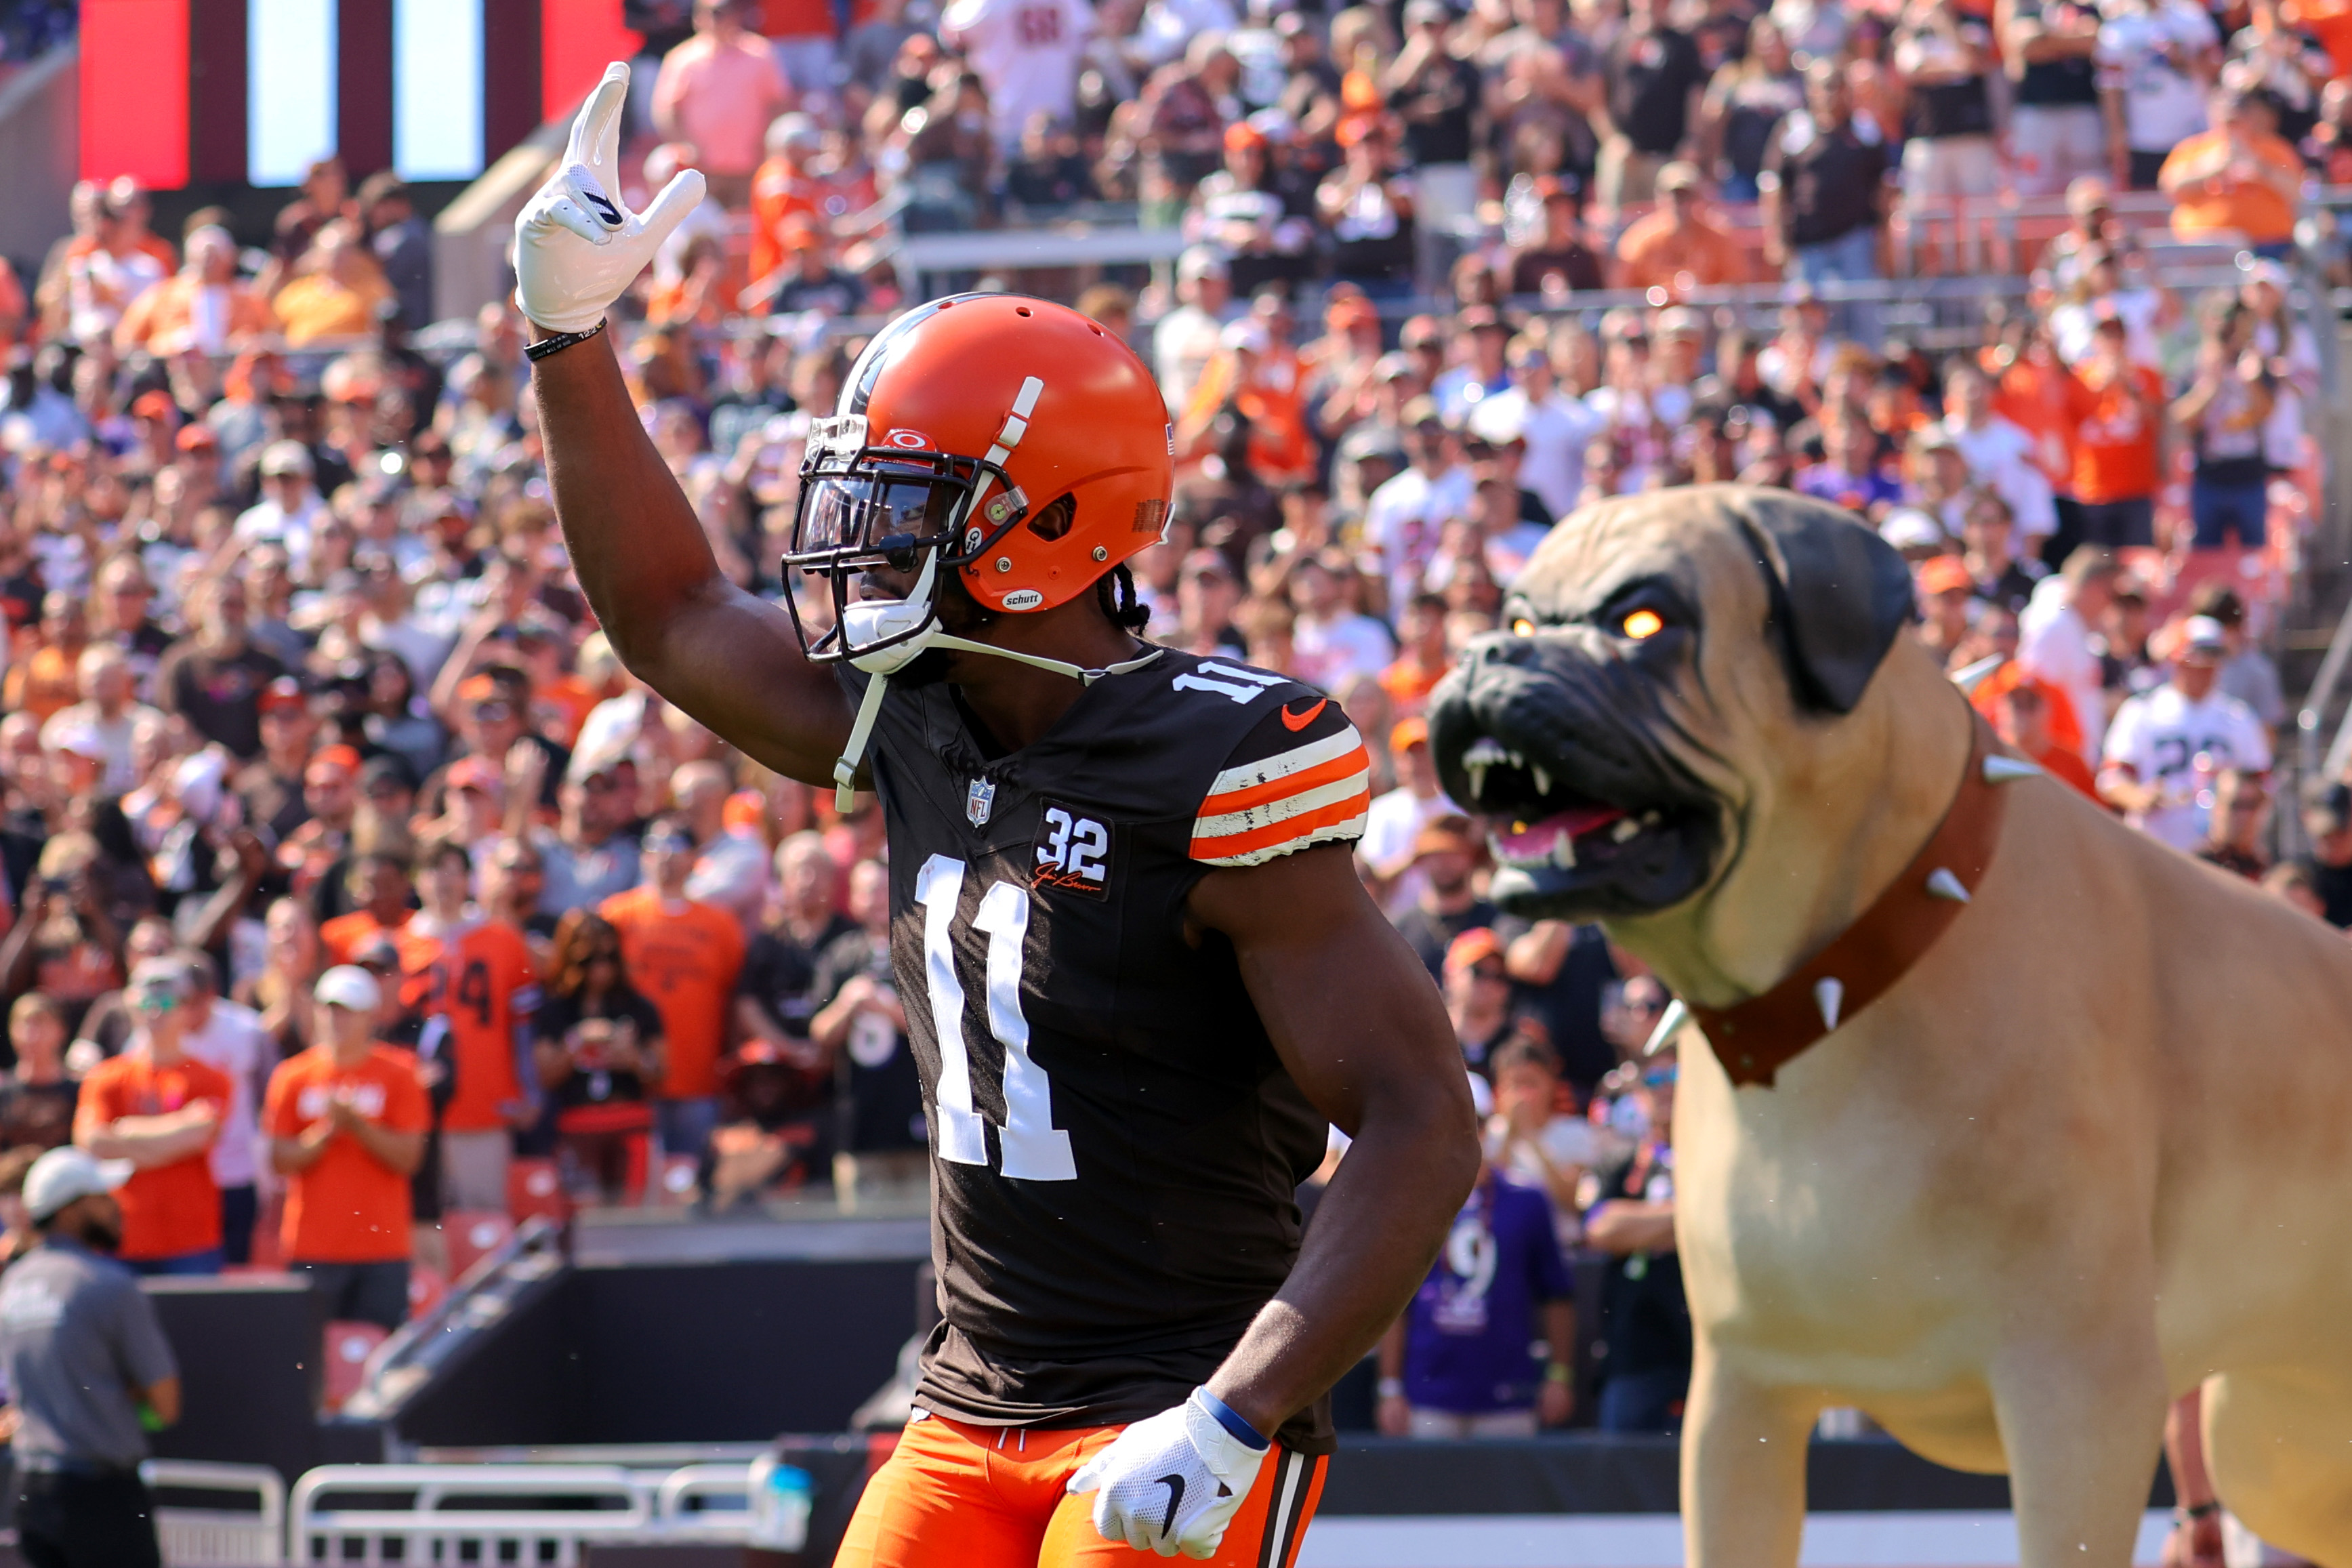 Cleveland Browns schedule has some interesting quirks - Dawgs By Nature